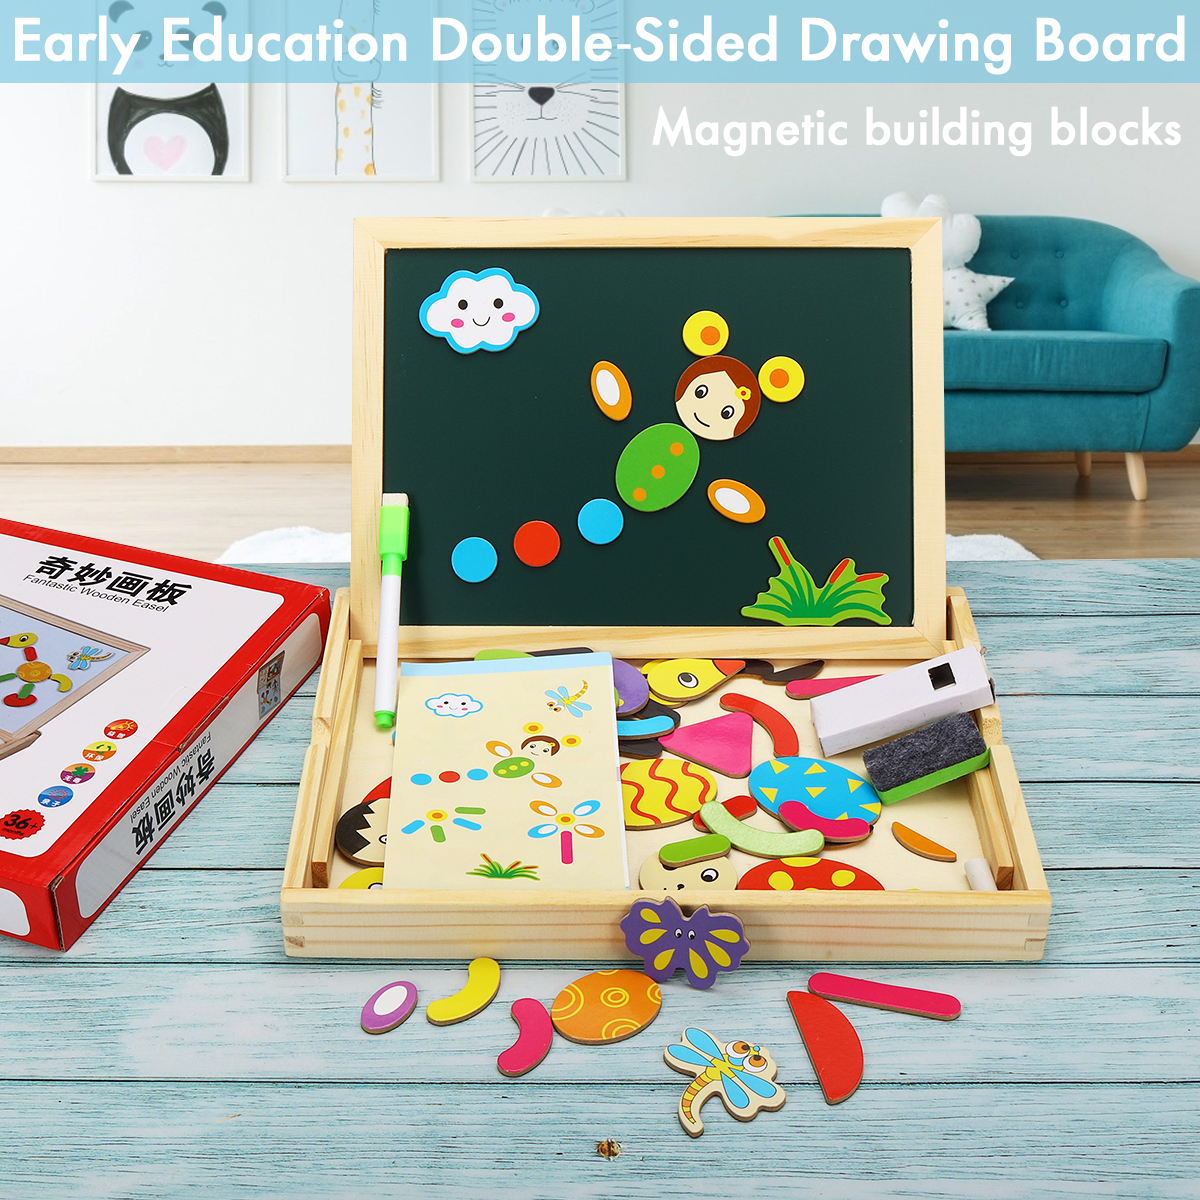 Wooden-Magnetic-Double-Sided-Drawing-Board-Blocks-Children-Early-Education-Toys-1676963-3